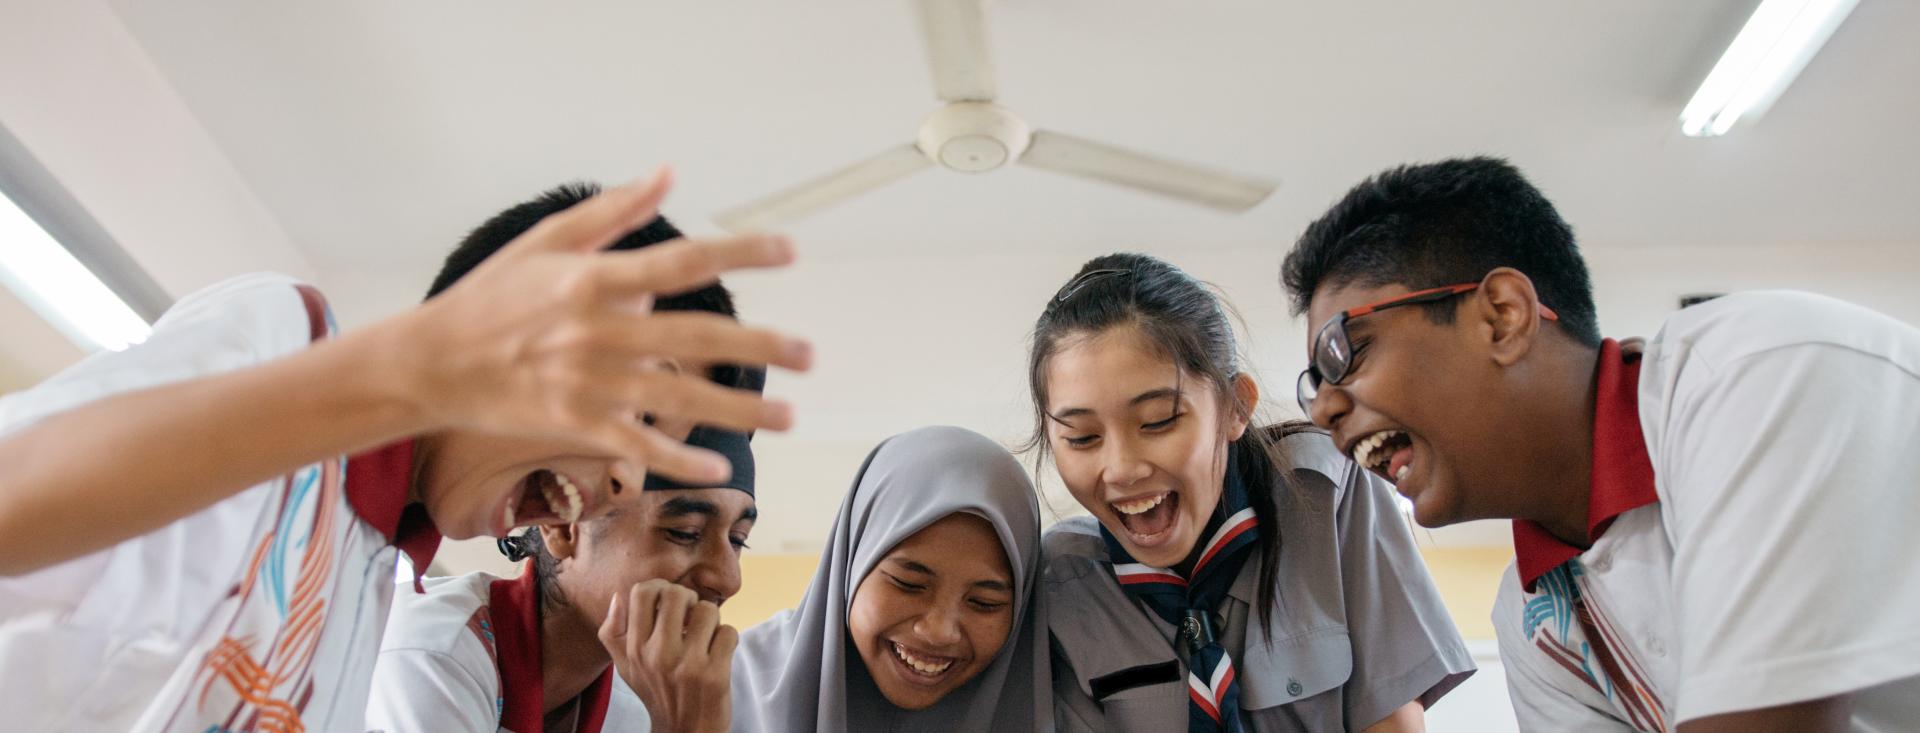 Five students in school uniforms are looking down at a desk with papers. They are smiling wide and laughing with excitement. One of the students has his hands up in the air.